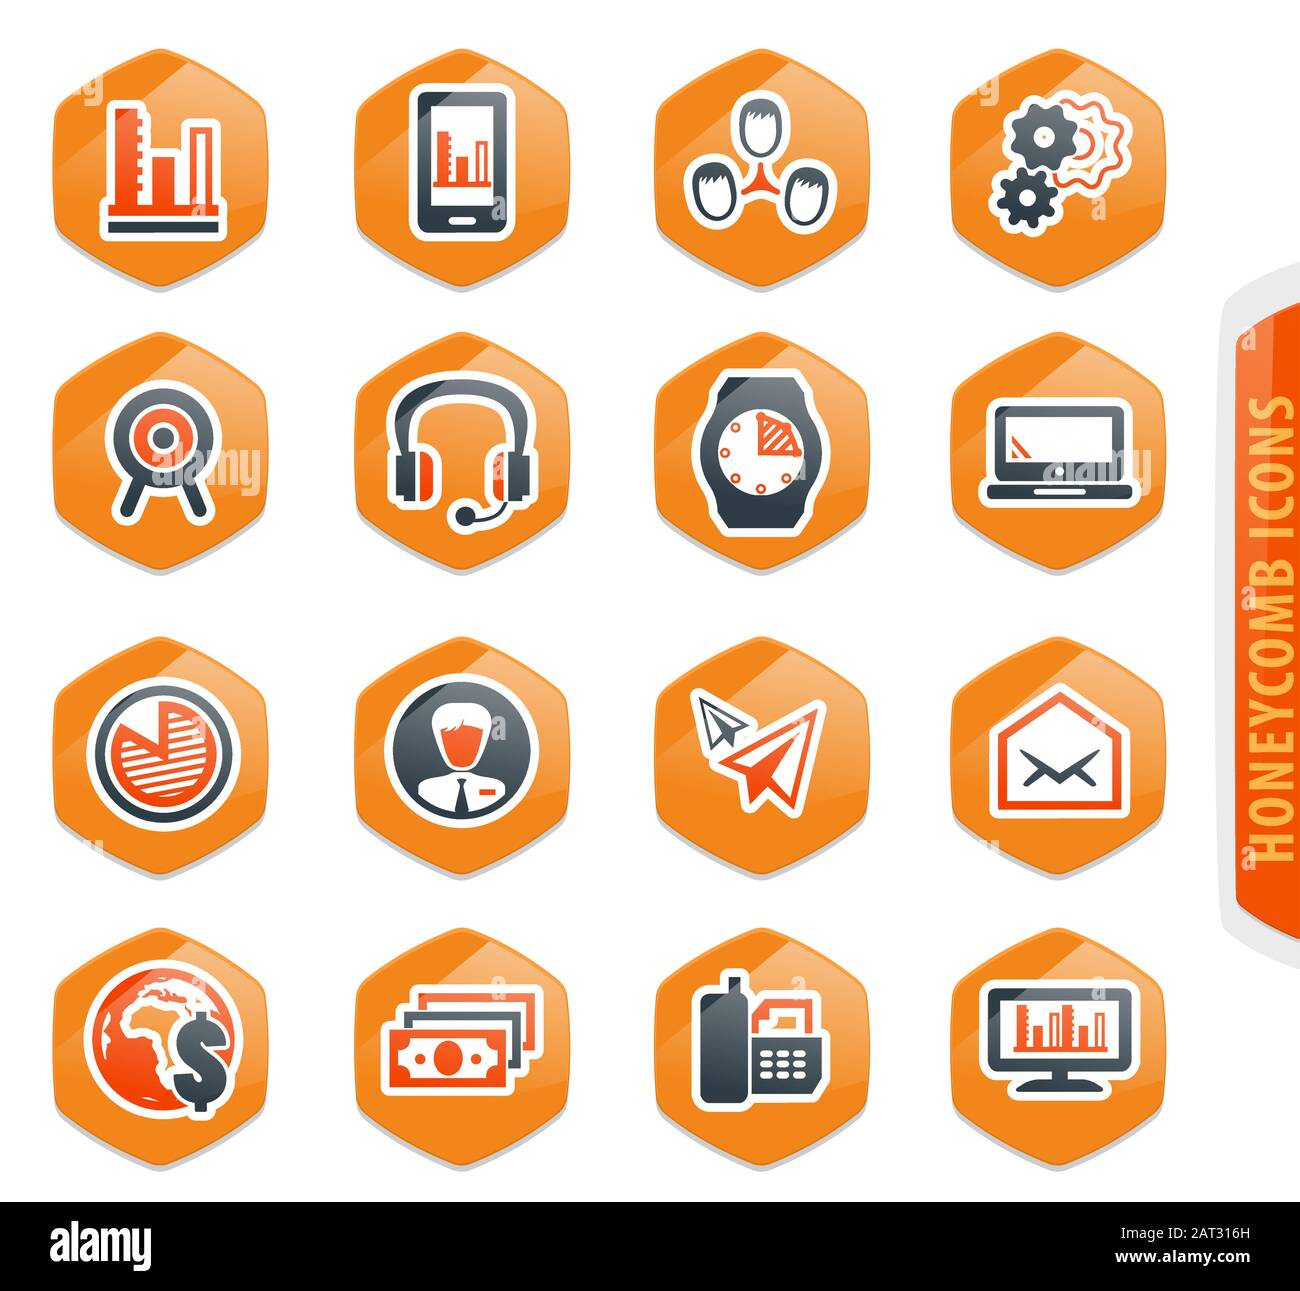 Business management and human resources icons set Stock Vector